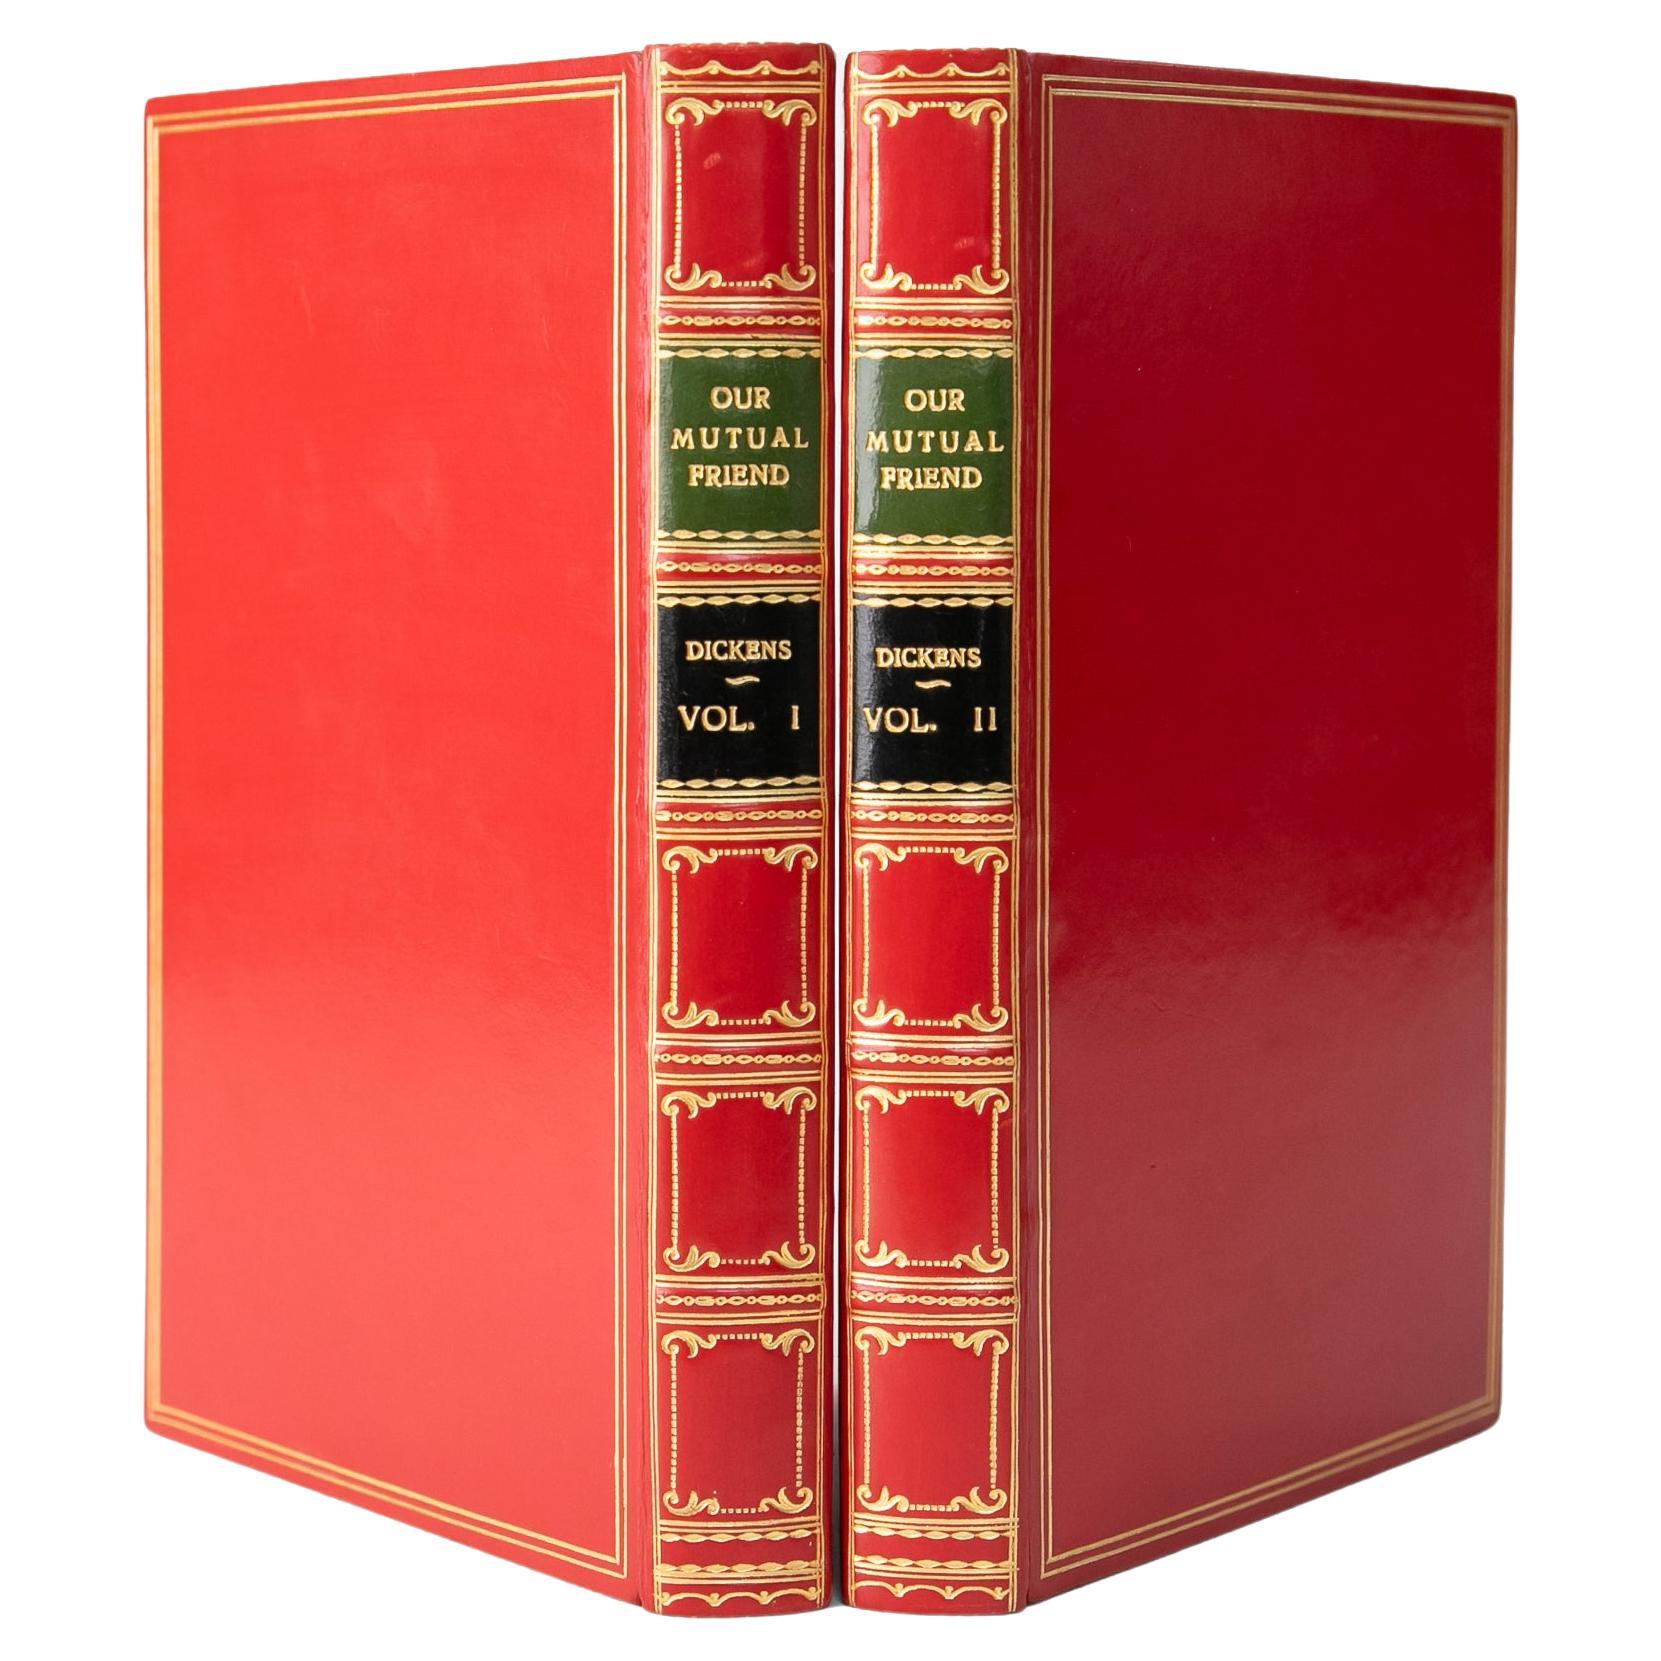 2 Volumes. Charles Dickens, Our Mutual Friend.